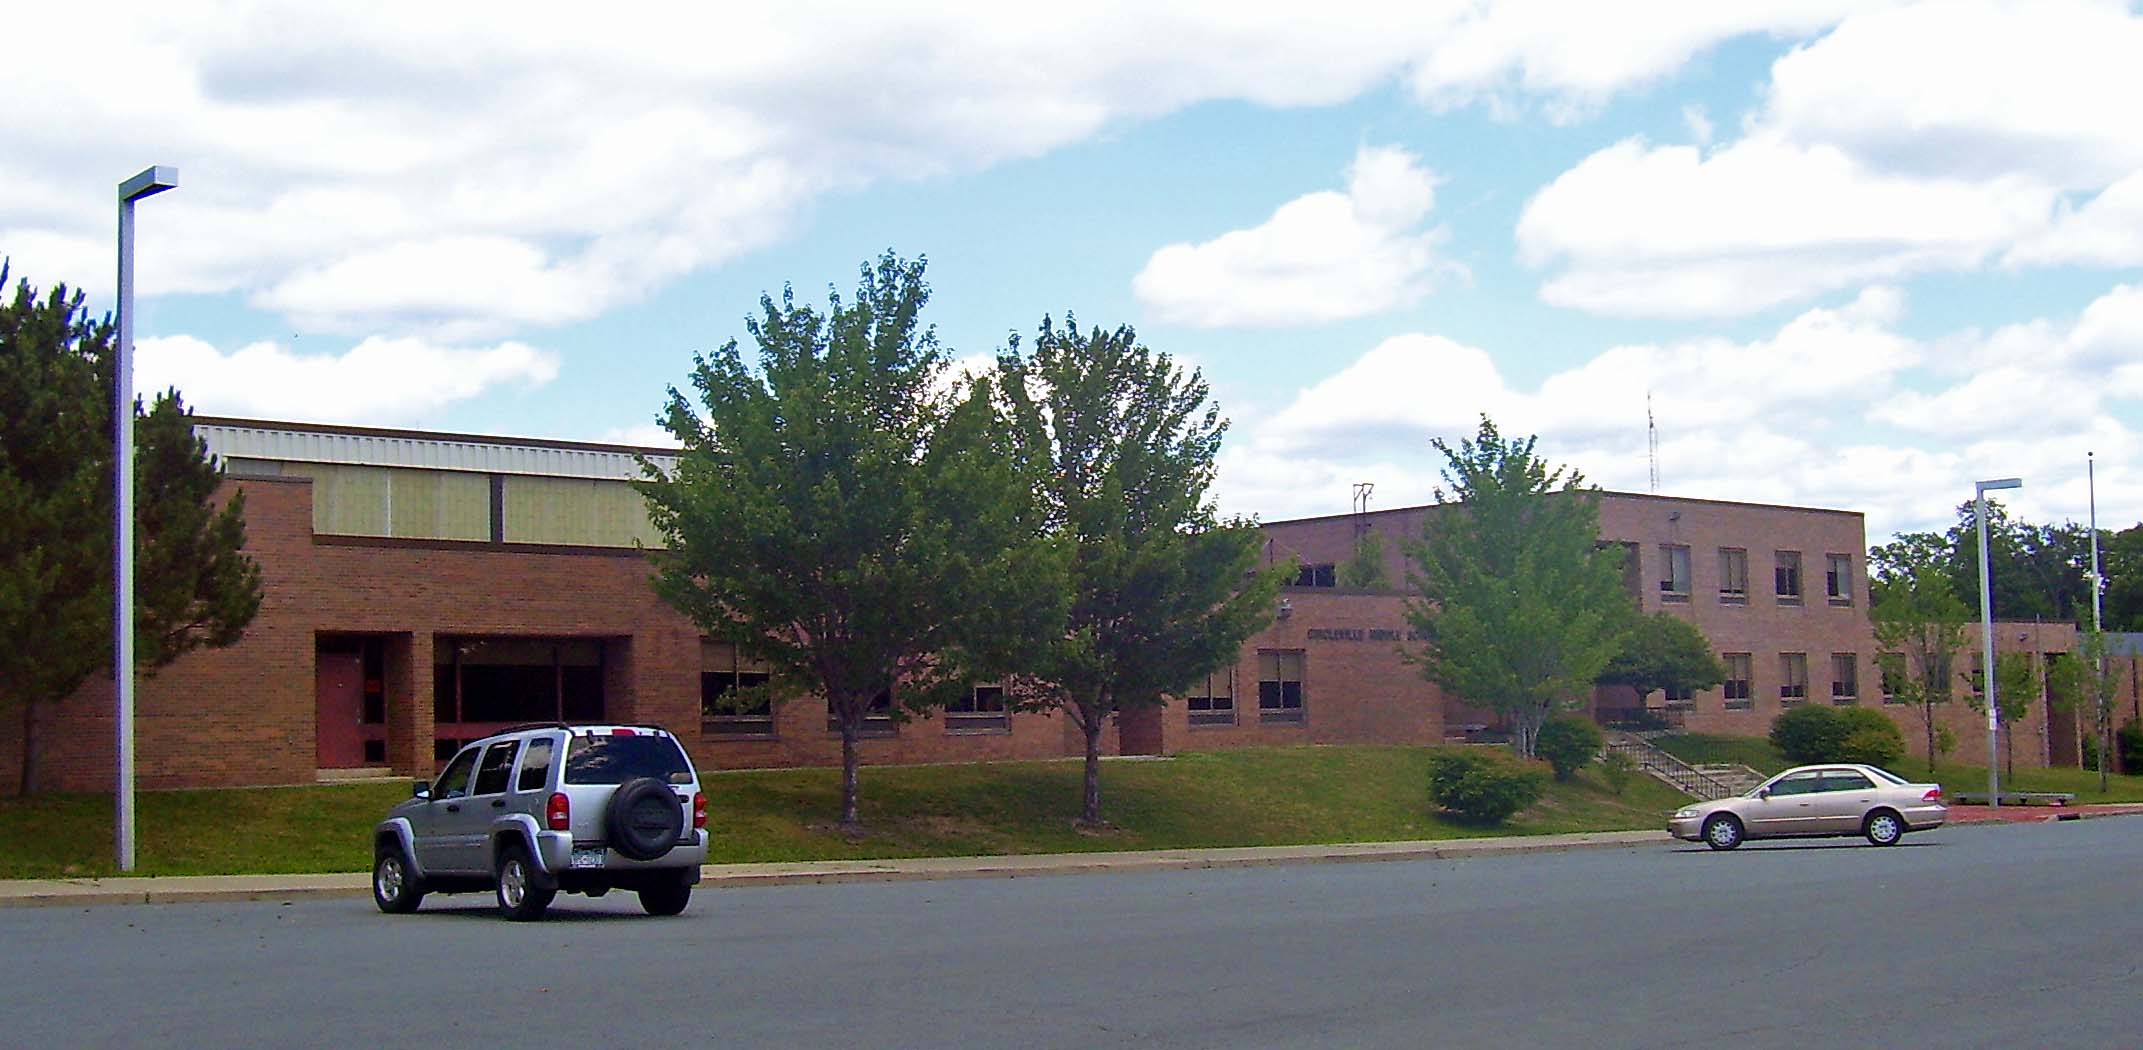 Circleville Middle School